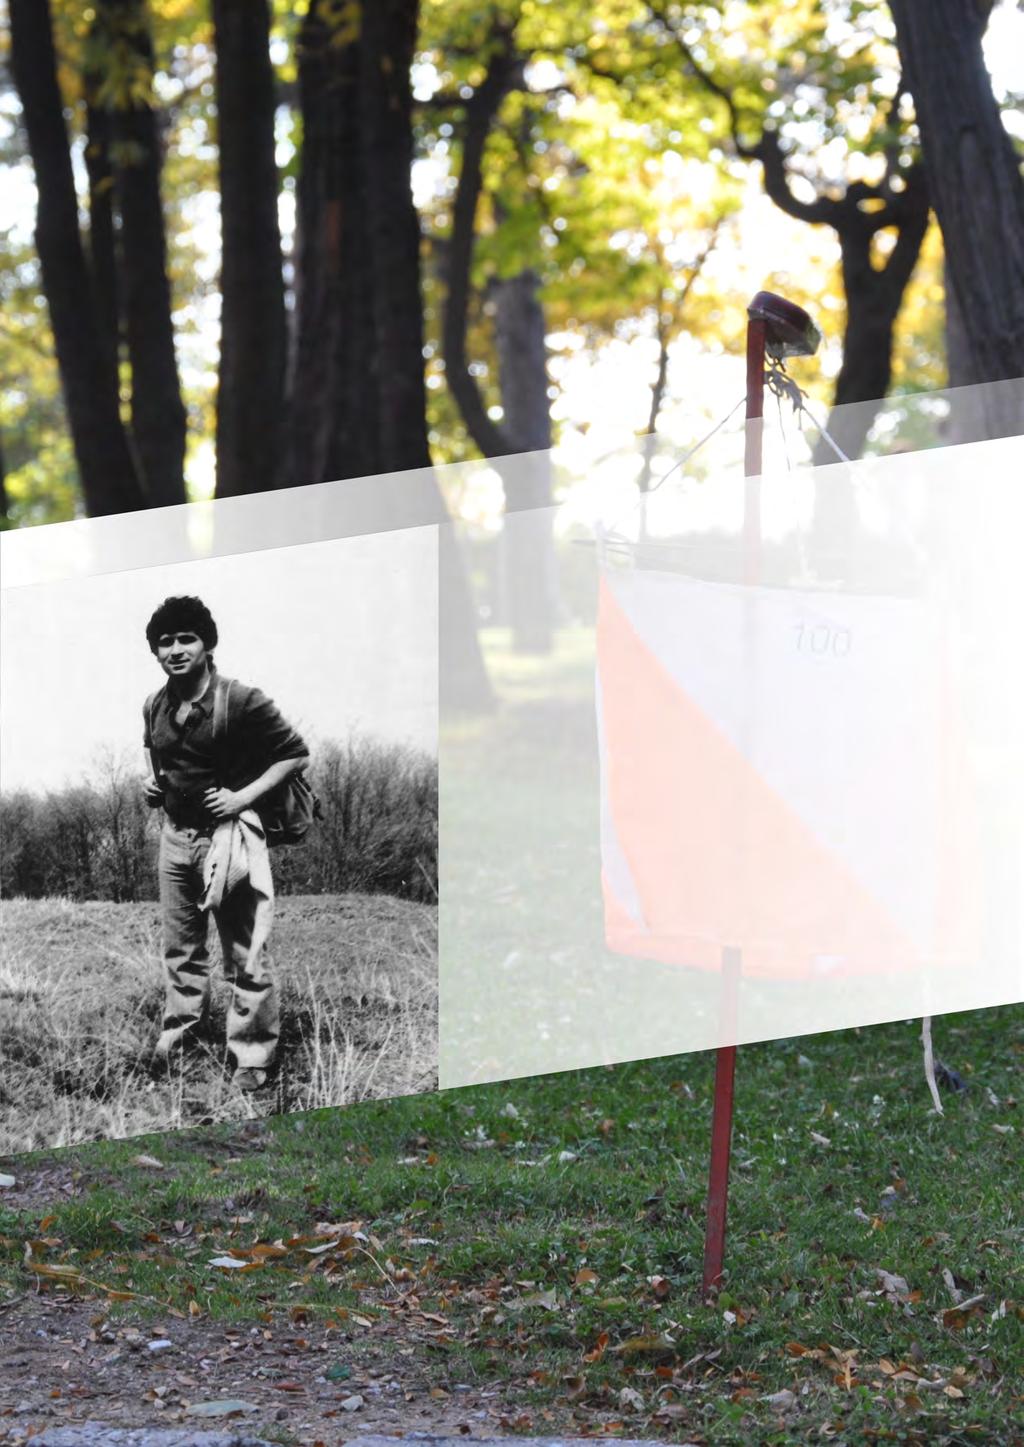 About Pece Atanasoski (1949-2009) We organise this orienteering competition in memory of Pece Atanasoski, our beloved orienteering trainer and second